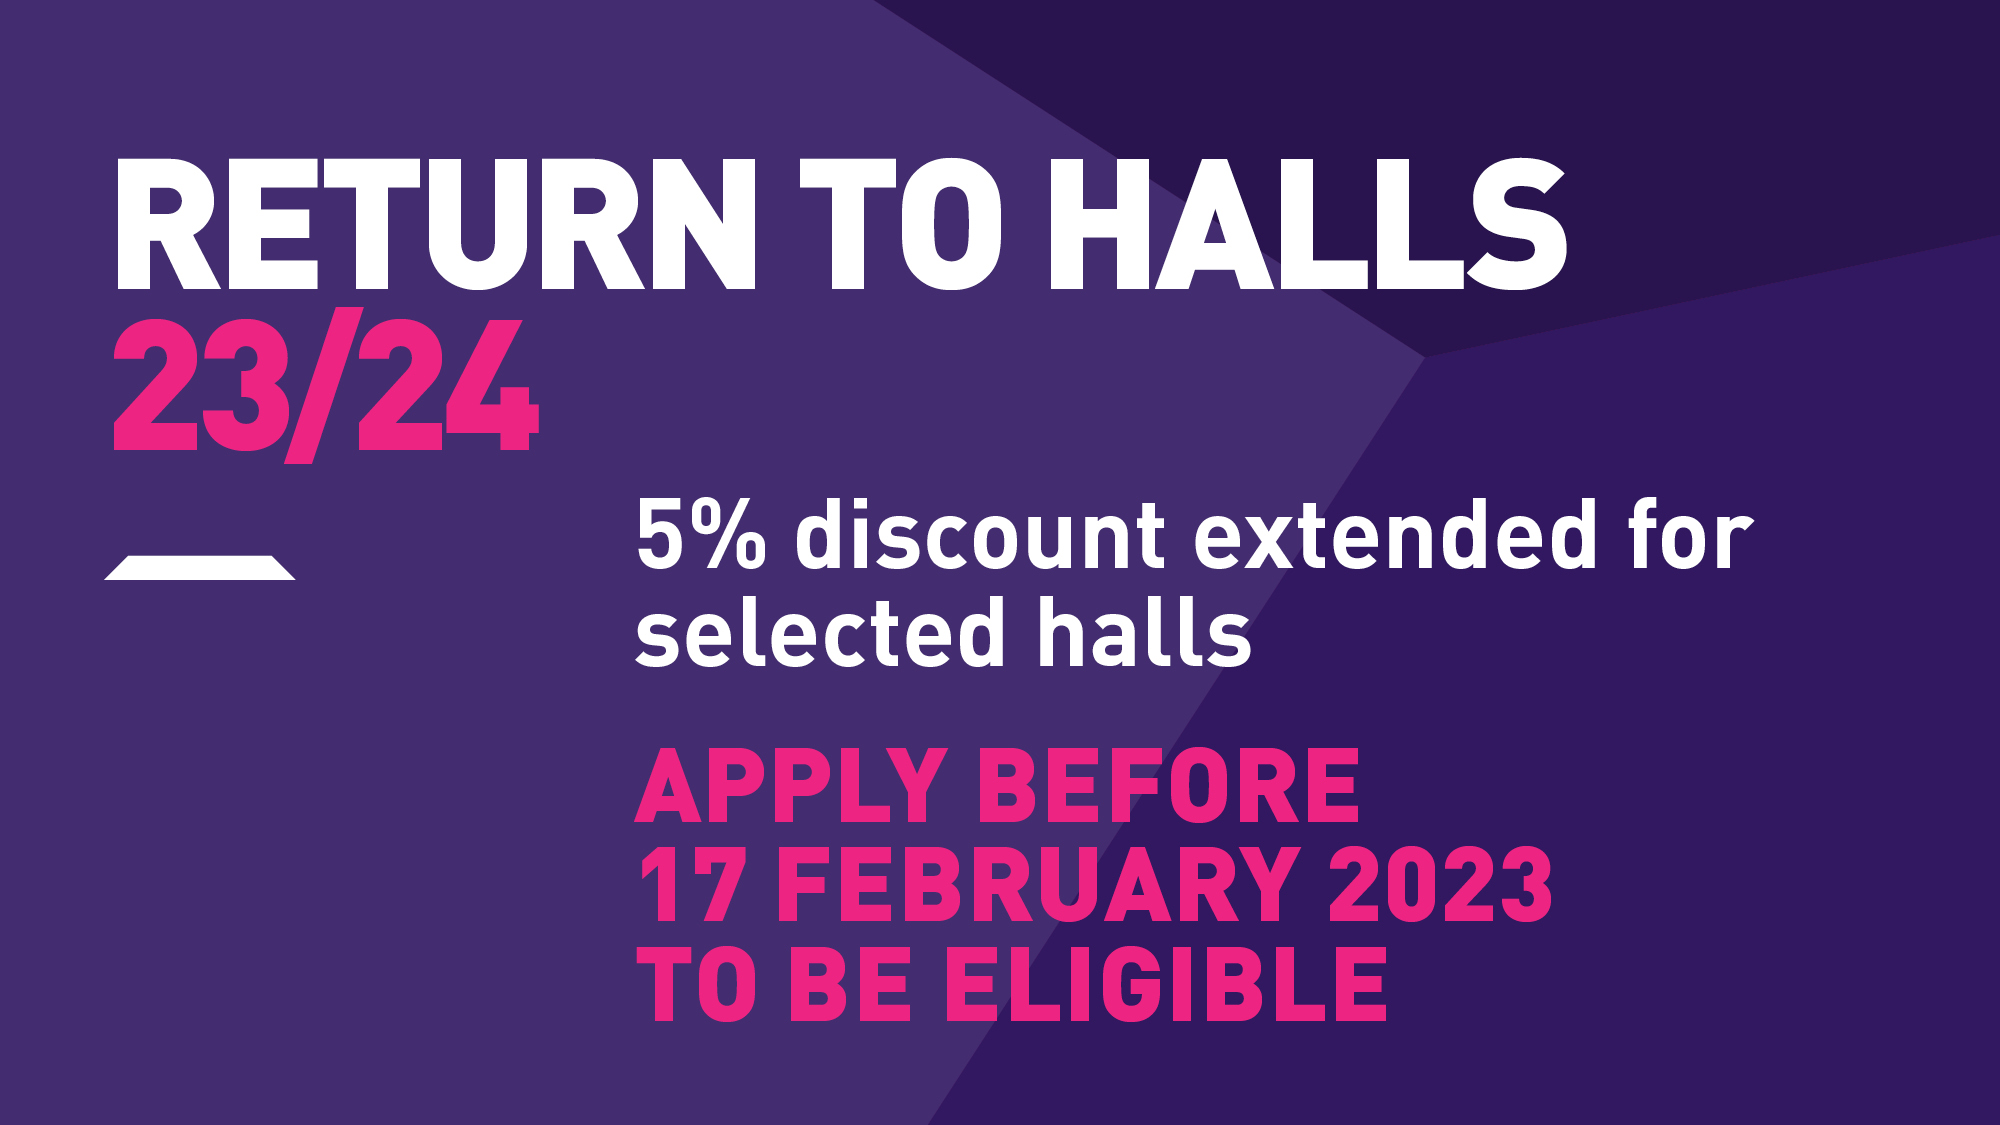 Purple background with white and pink writing that says 'Return to halls 23/24. 5% discount extended for selected halls. Apply before 17 February 2023 to be eligible'